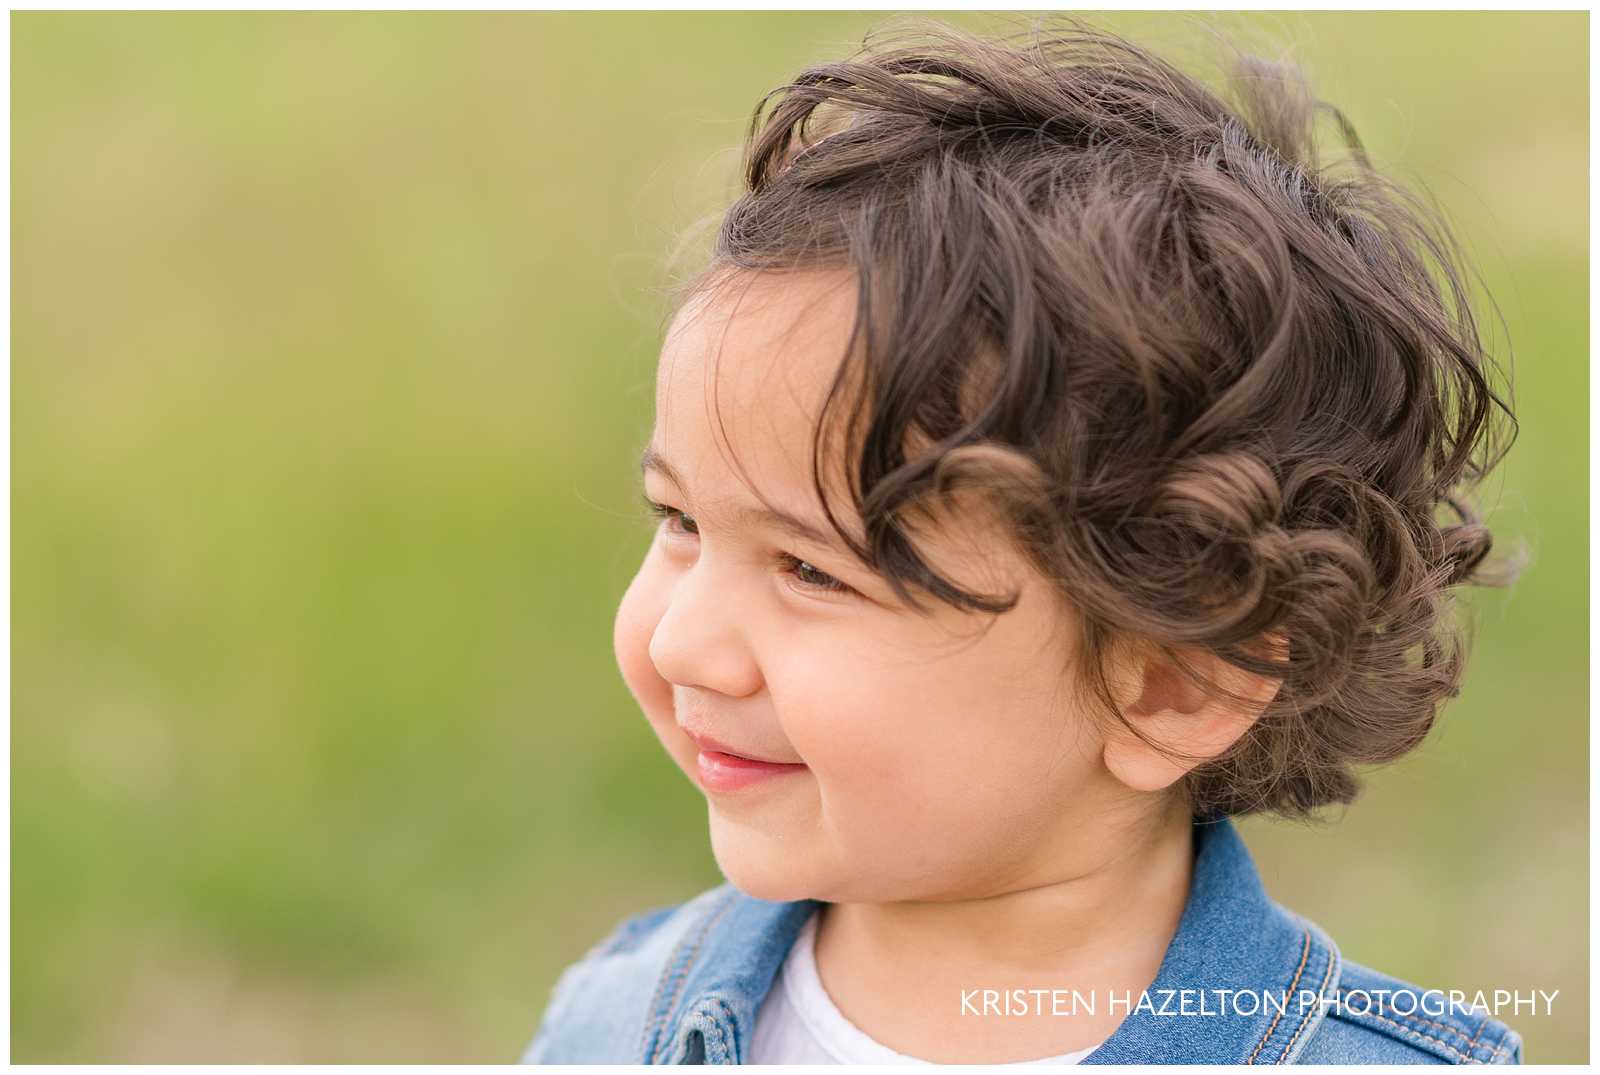 Toddler girl with brown curly hair by Forest Park, IL photographer Kristen Hazelton